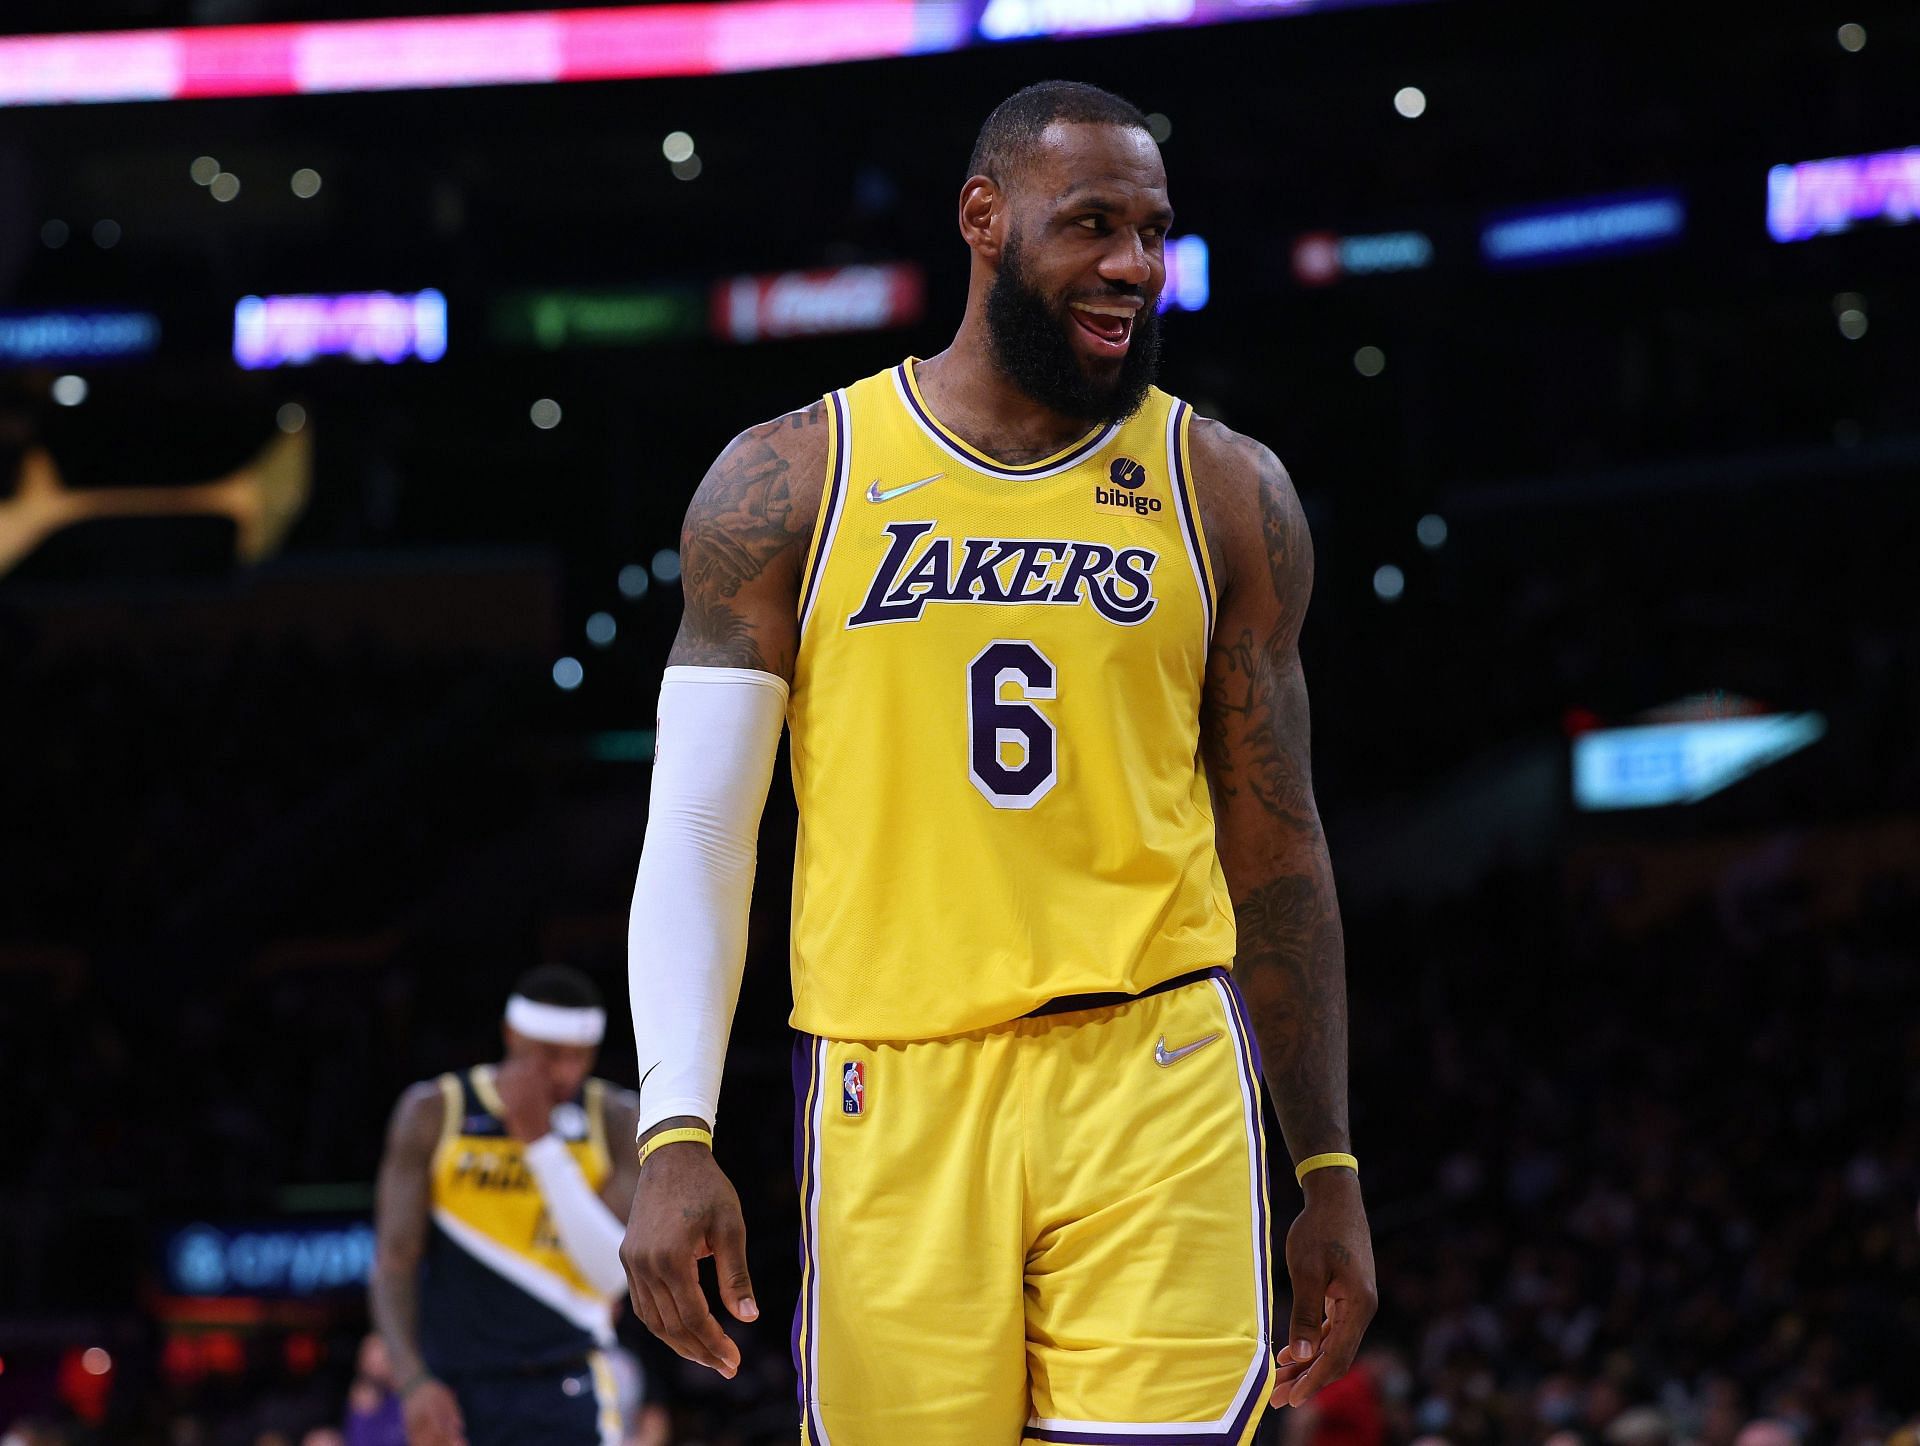 LeBron James #6 of the Los Angeles Lakers smiles during a 111-104 Indiana Pacers win at Crypto.com Arena on January 19, 2022 in Los Angeles, California.